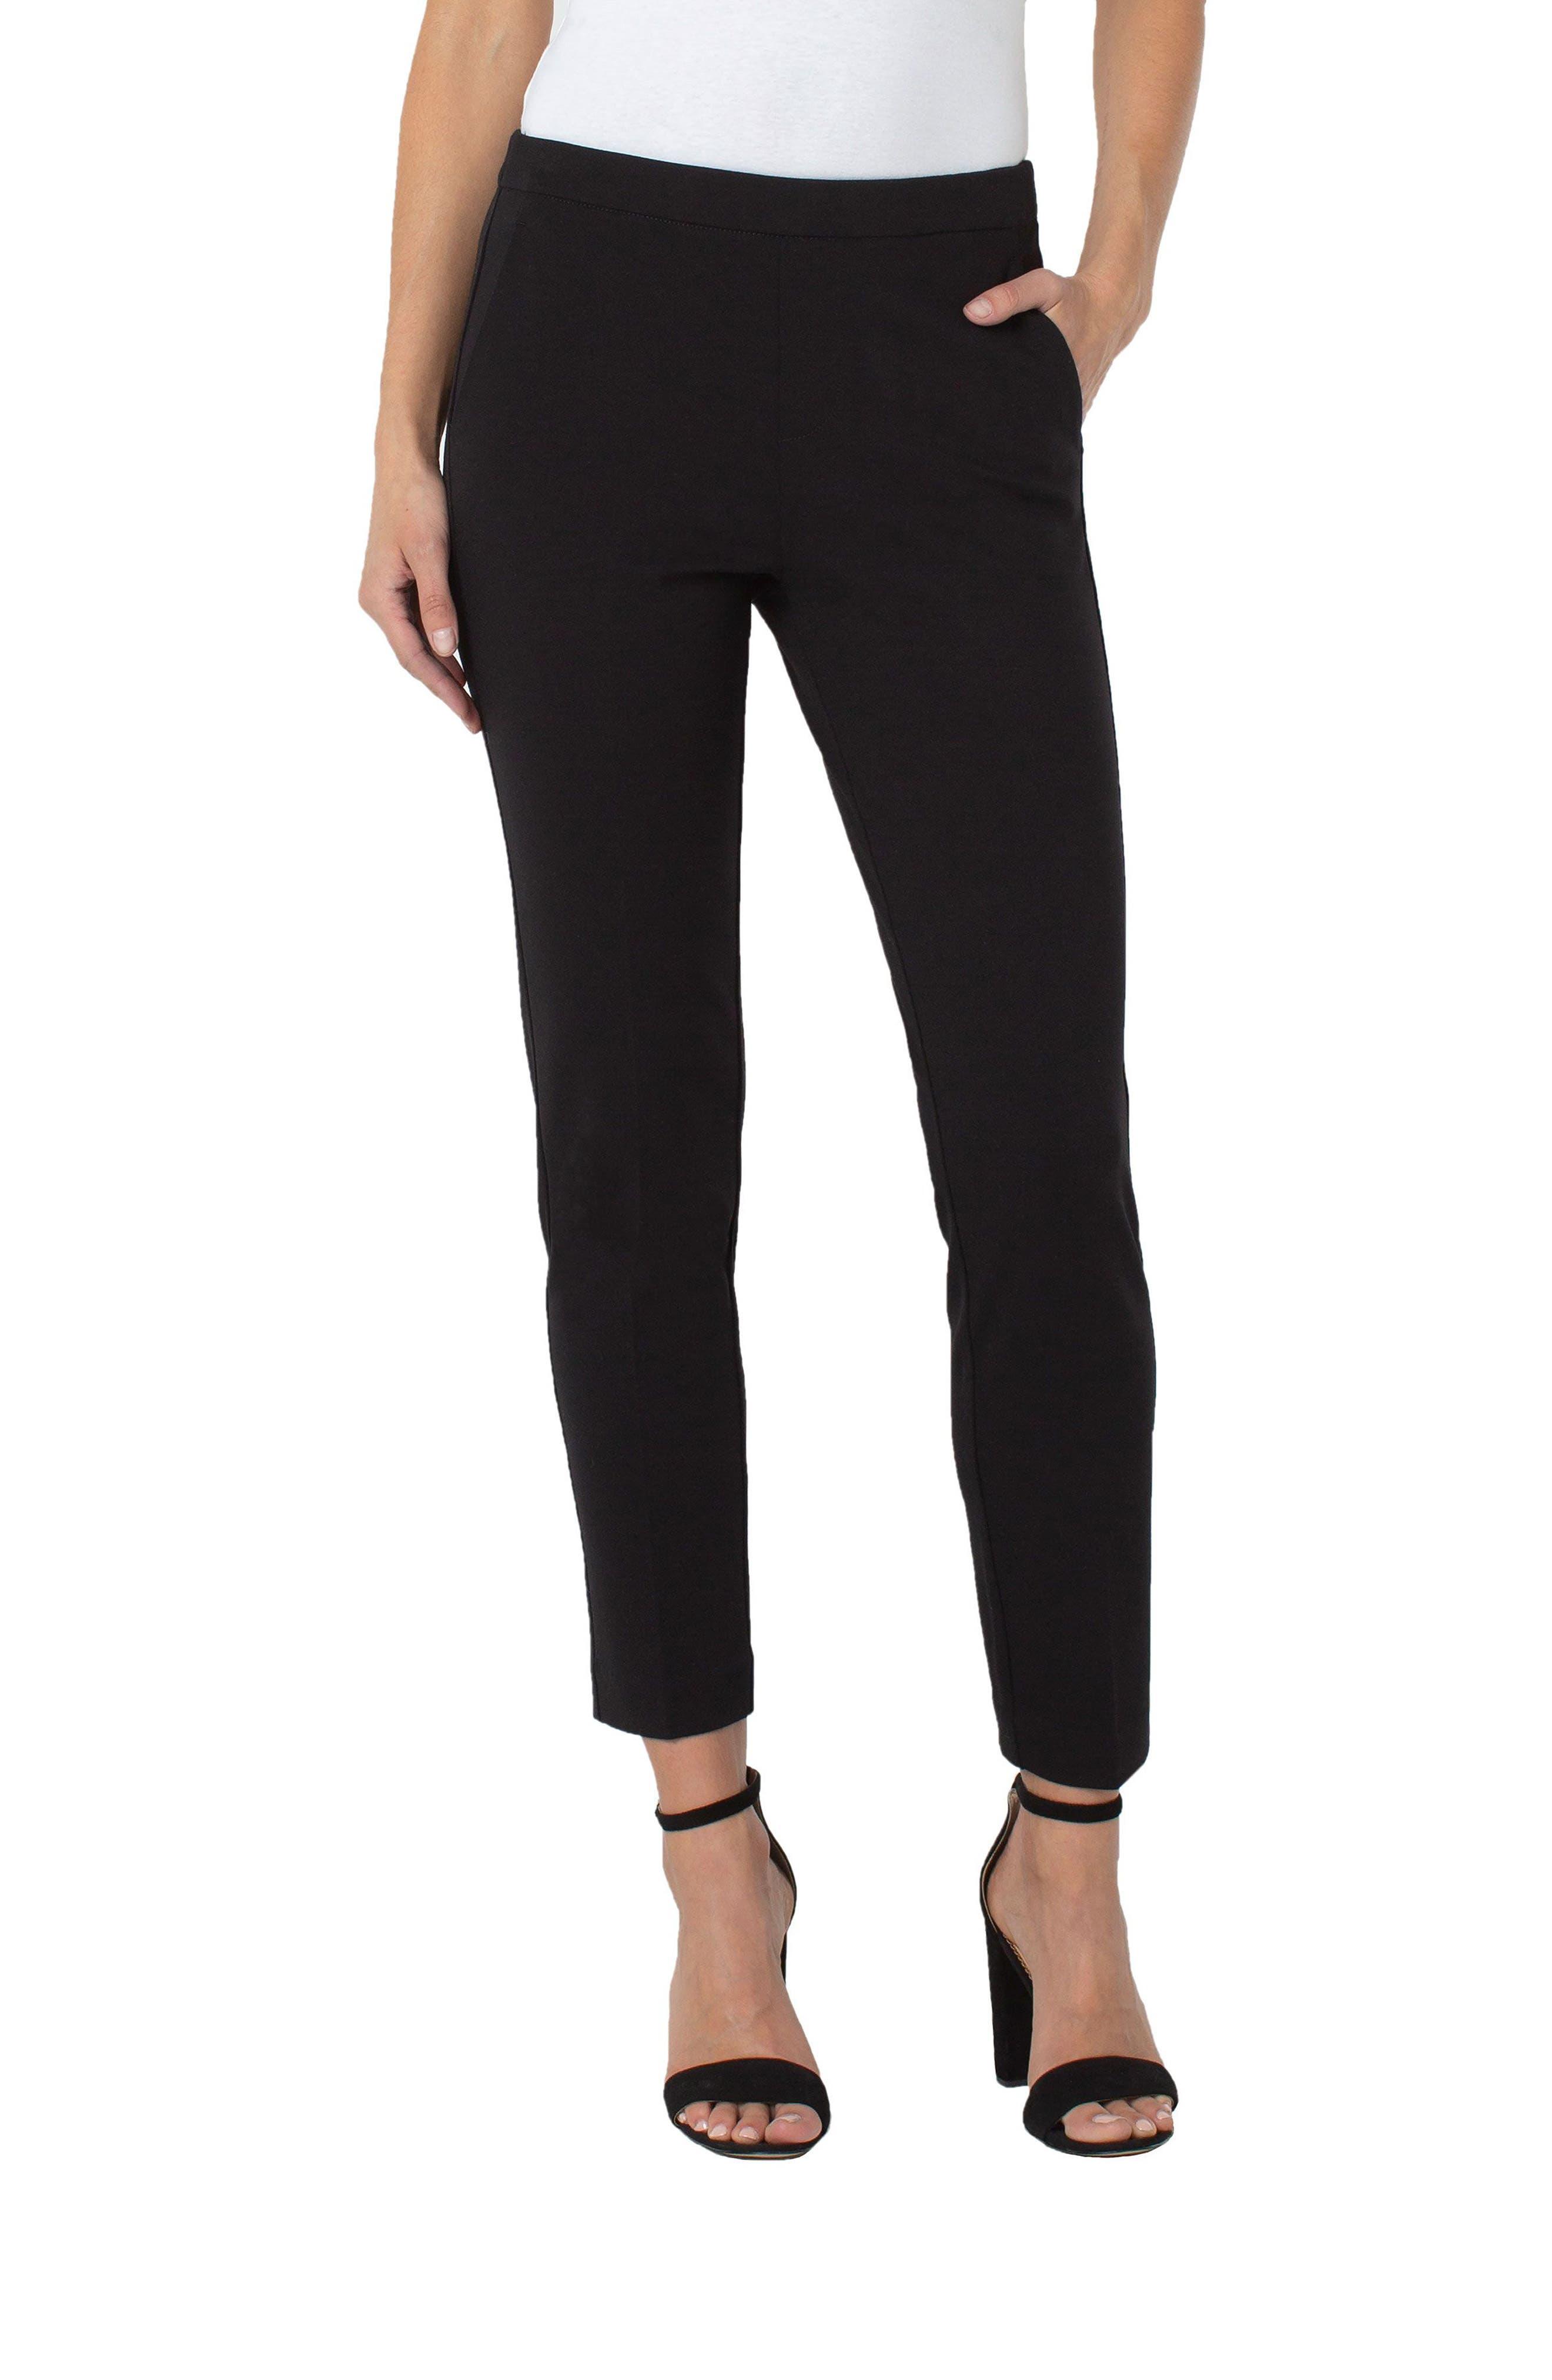 Liverpool Jeans Company Kayla Pull-on Trousers in Black | Lyst